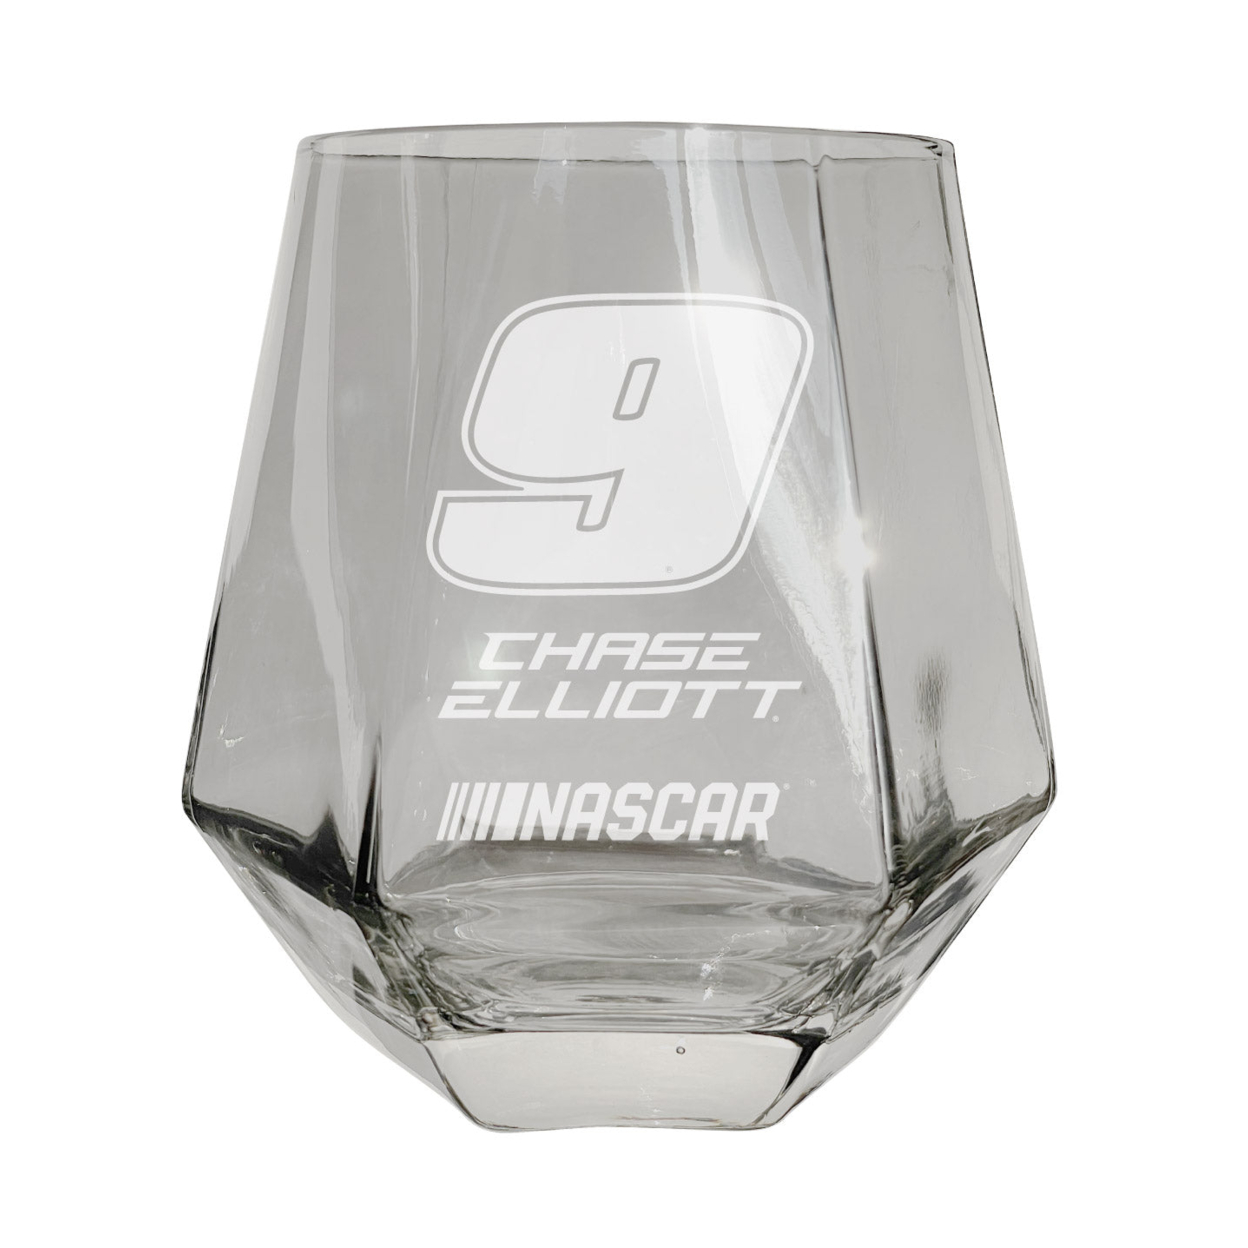 #9 Chase Elliott Officially Licensed 10 Oz Engraved Diamond Wine Glass - Clear, 2-Pack